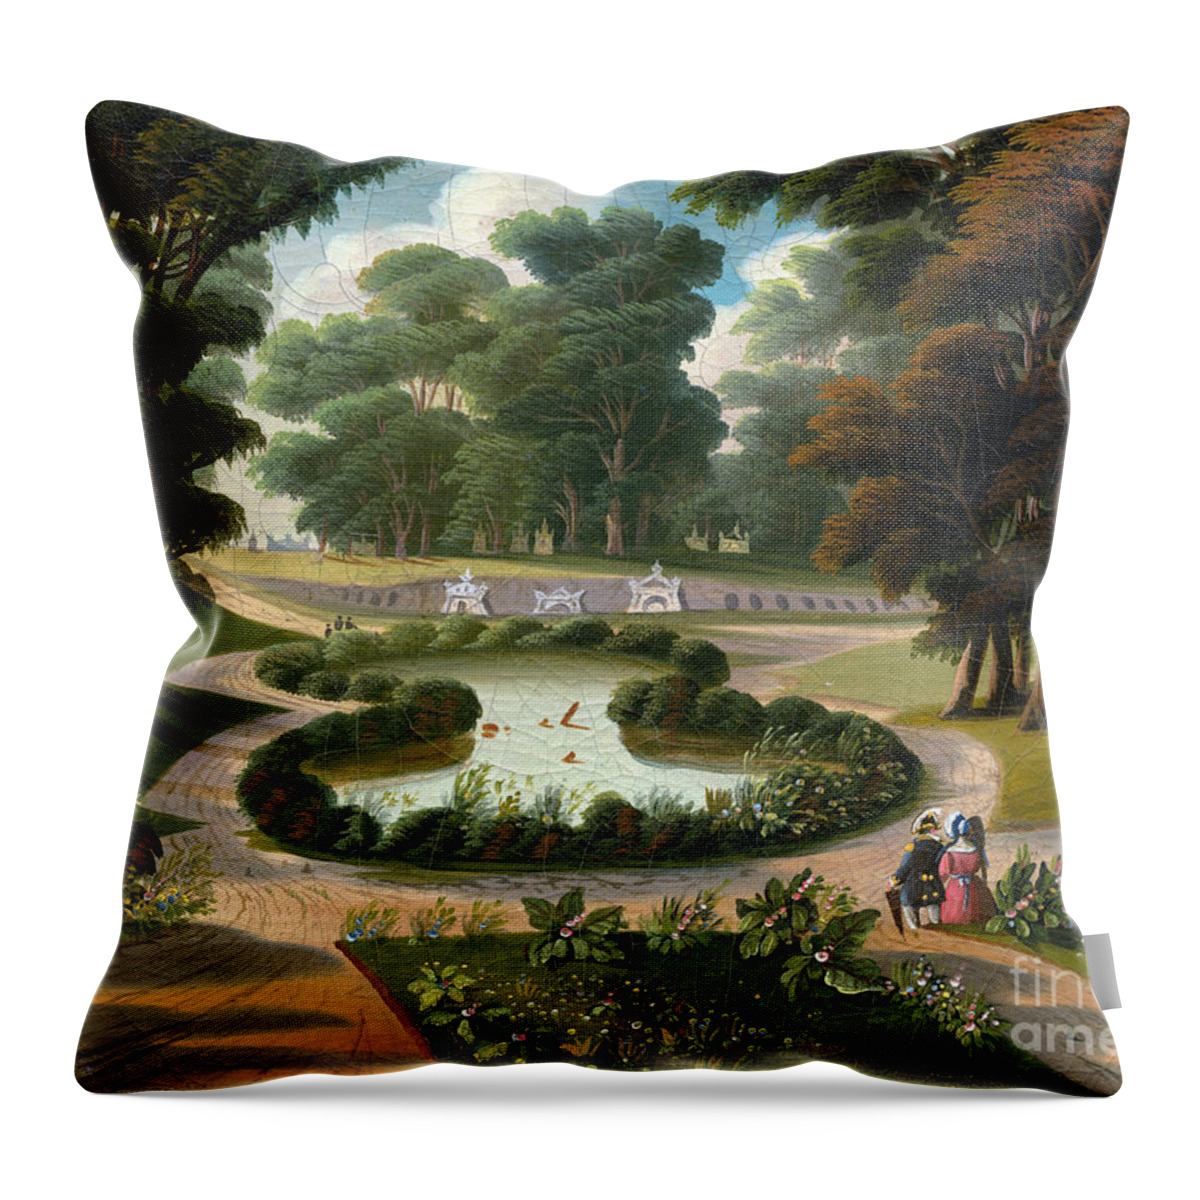 19th Century Throw Pillow featuring the painting Chambers - Cambridge, Ma. by Granger